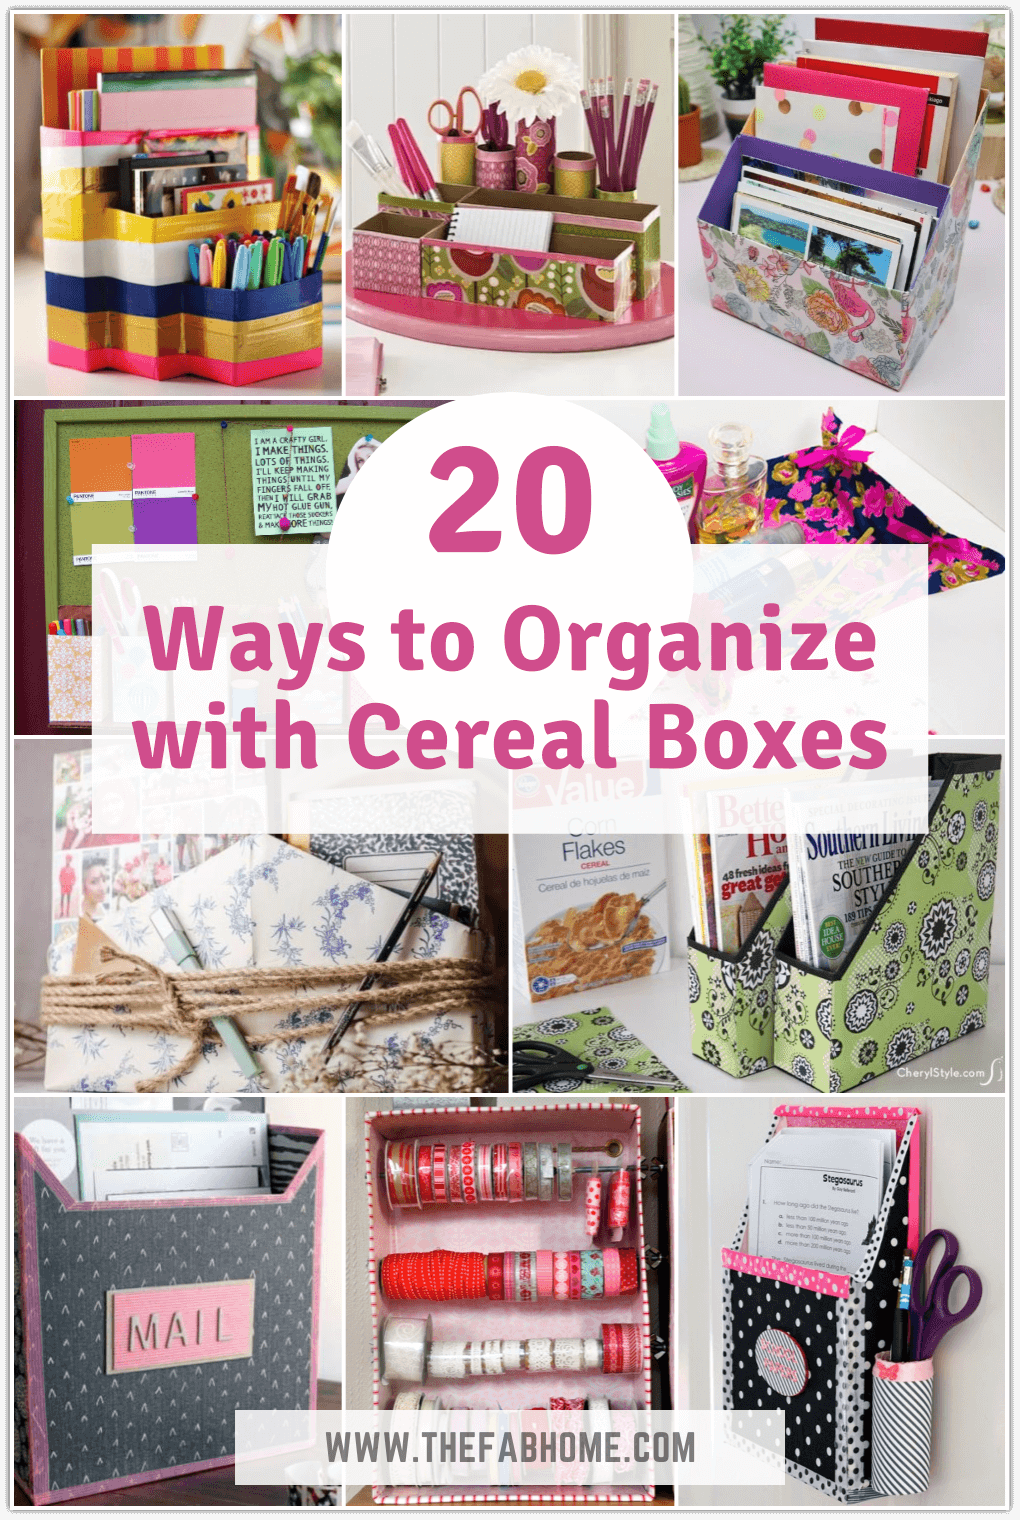 https://thefabhome.com/wp-content/uploads/2021/06/Genius-Ways-to-Organize-with-Cereal-Boxes_Pin.png